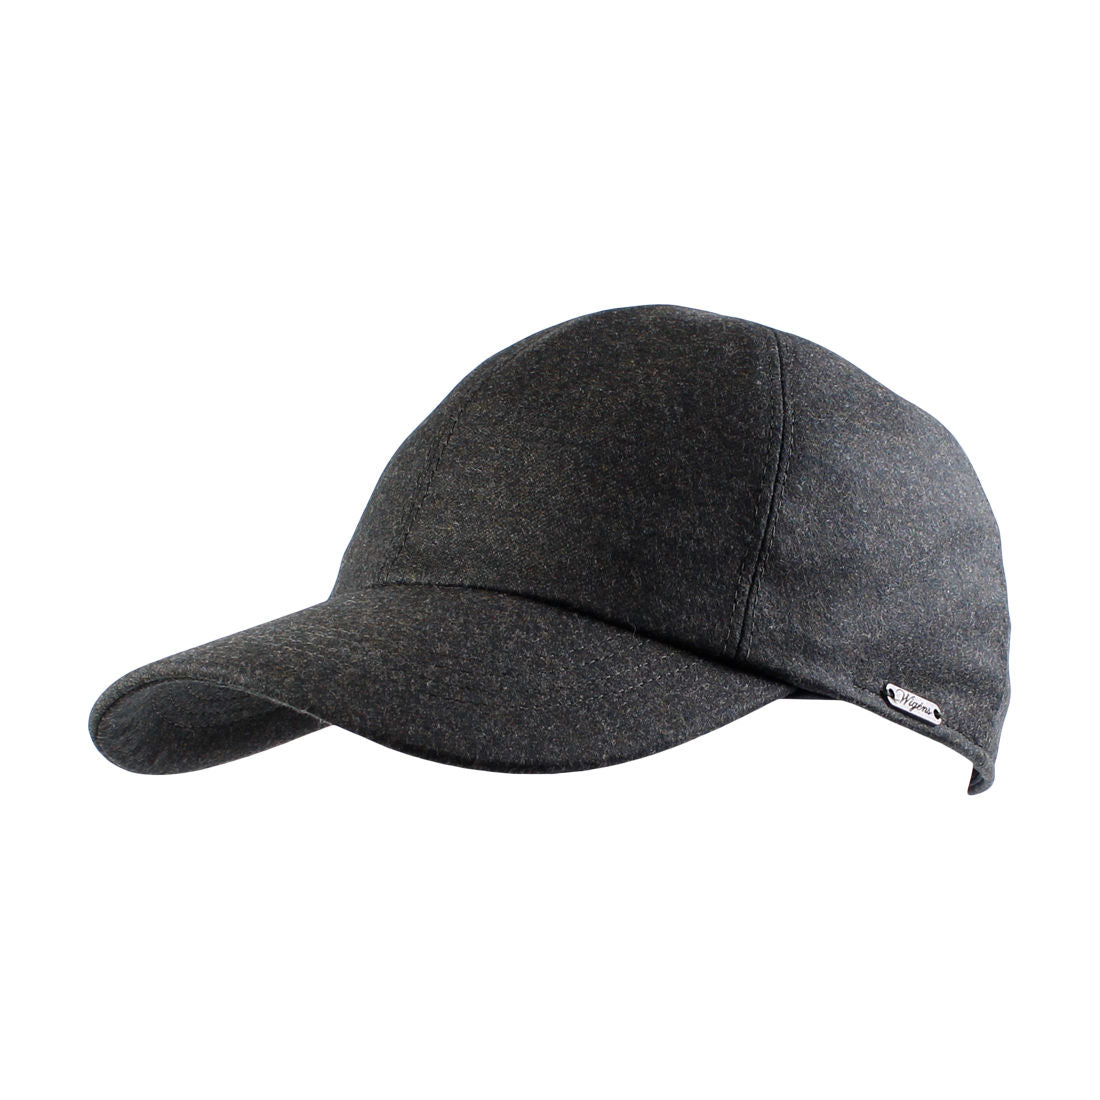 Loro Piana 'Storm System' Wool and Cashmere Flannel Baseball Classic Cap with Earflaps (Choice of Colors) by Wigens